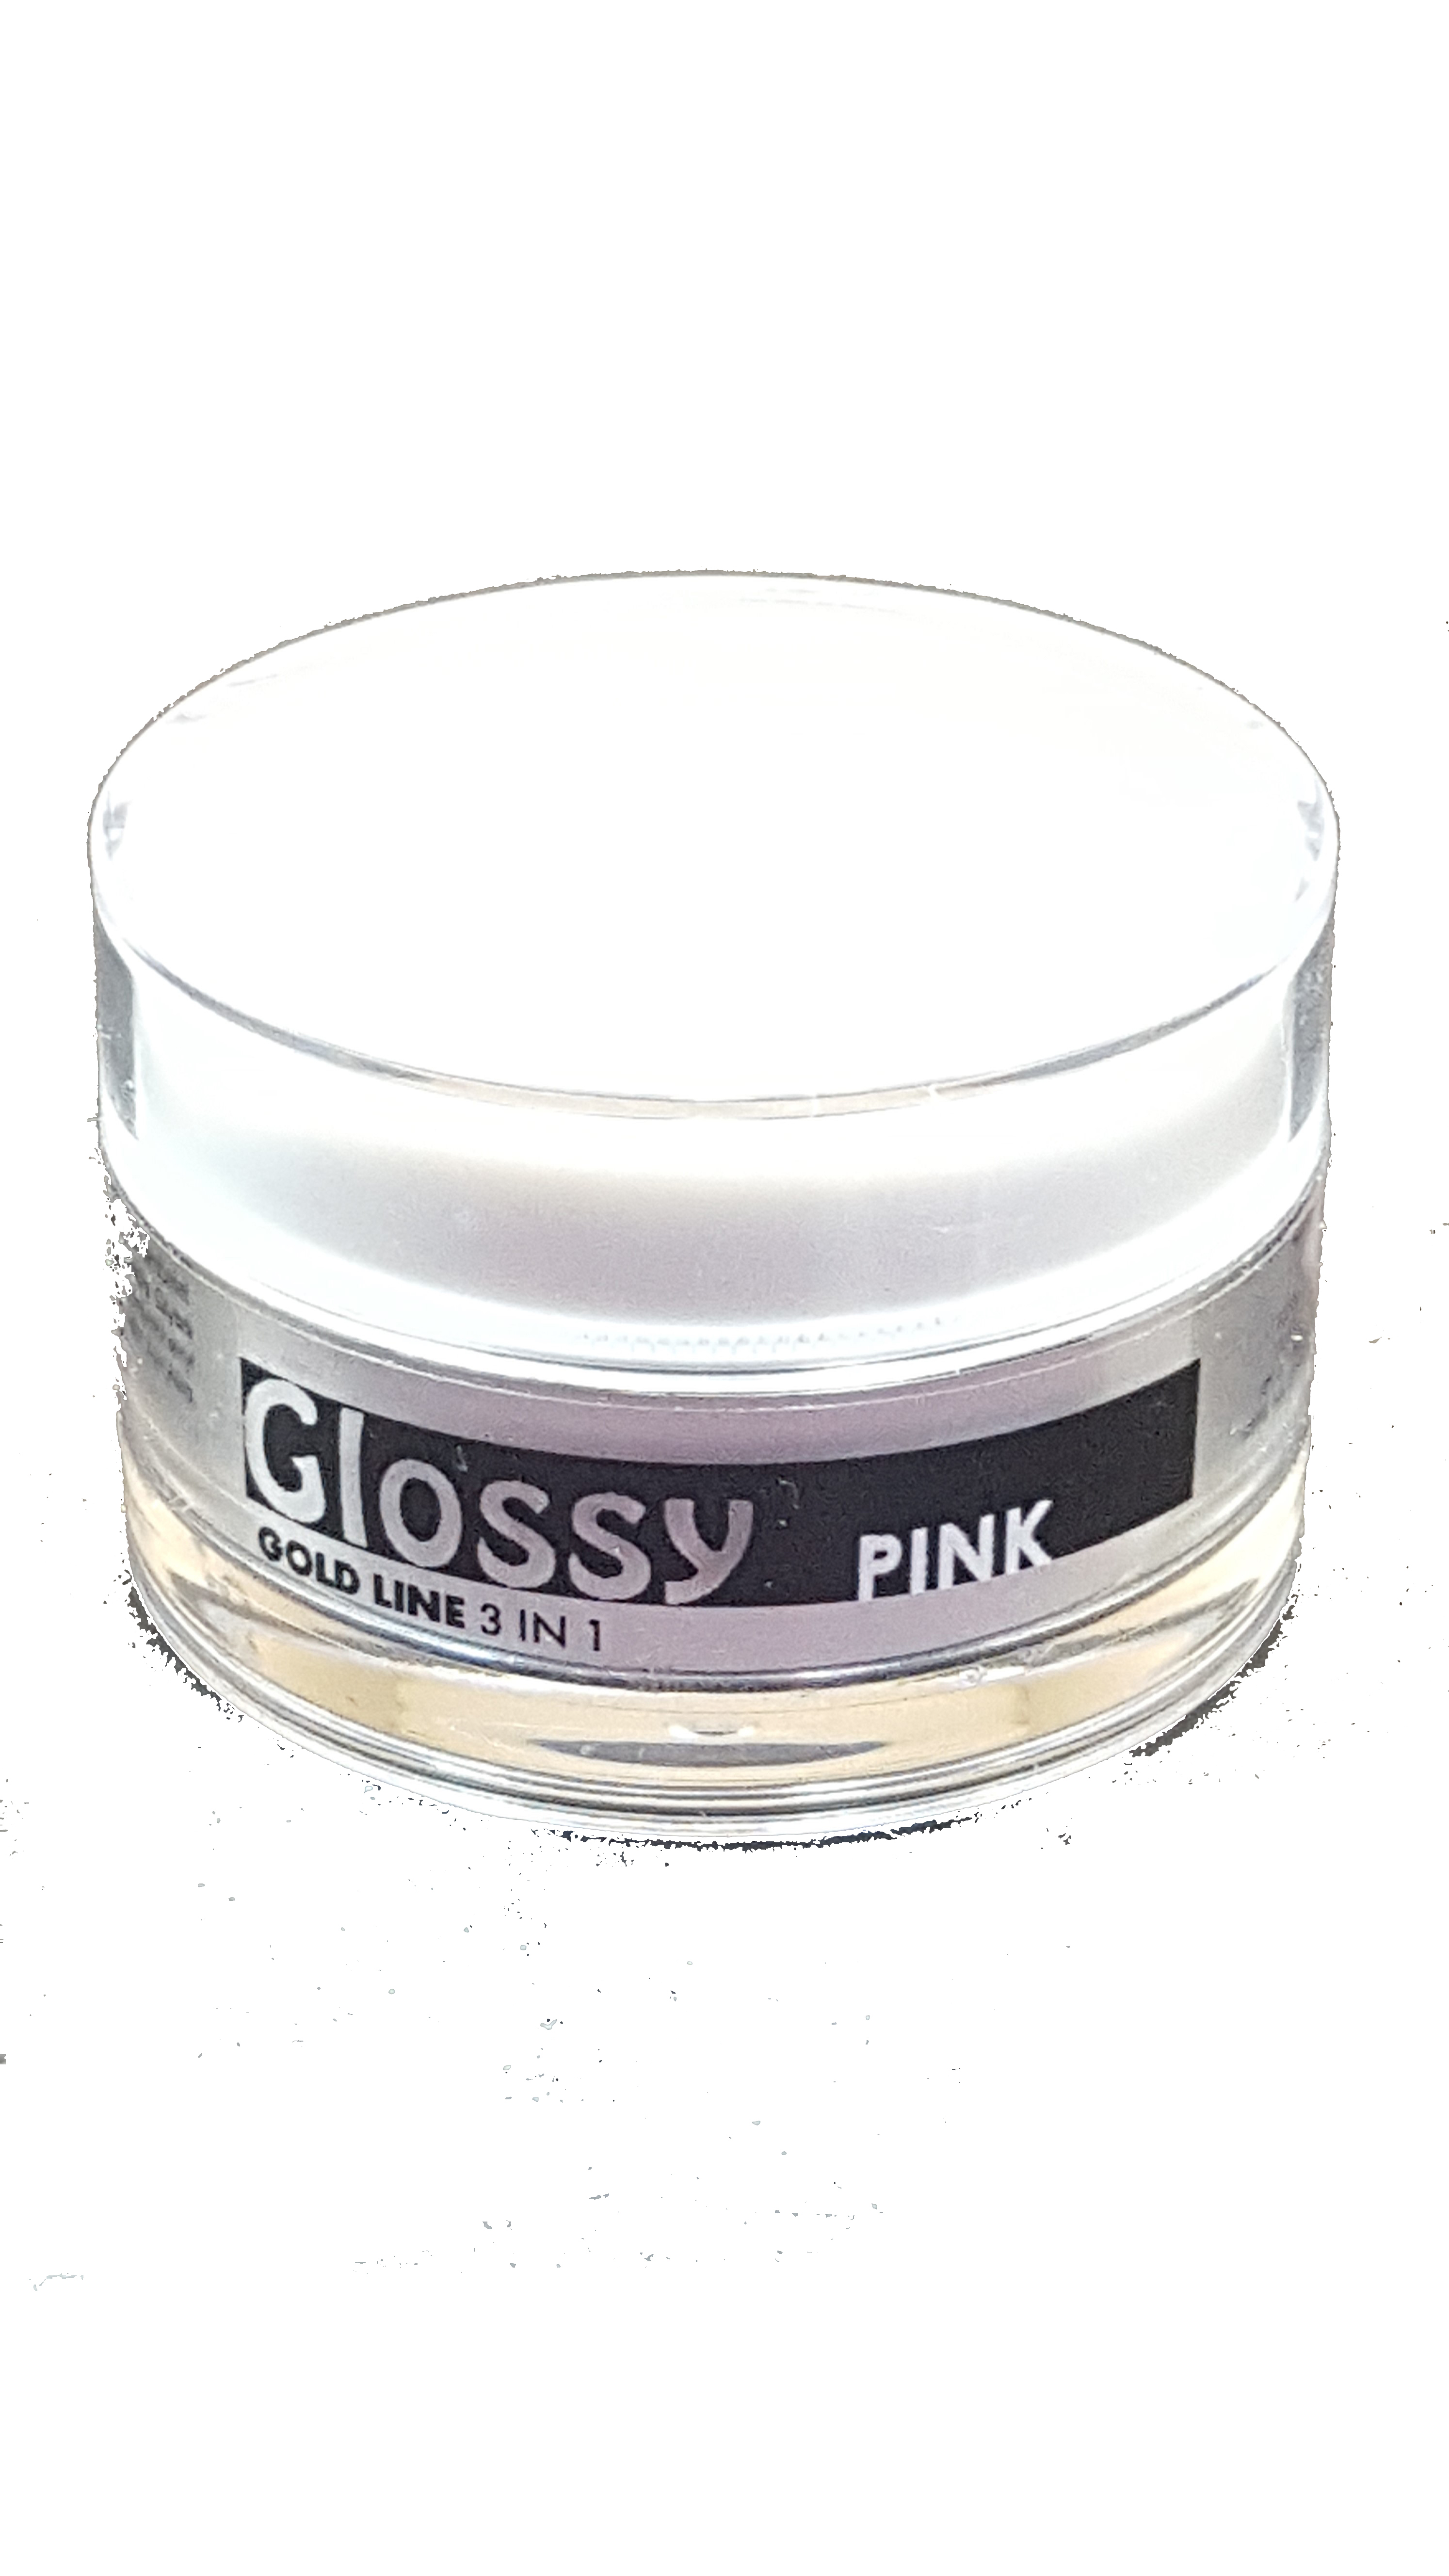 Glossy -Gel 3 in1 pink transparent 15g